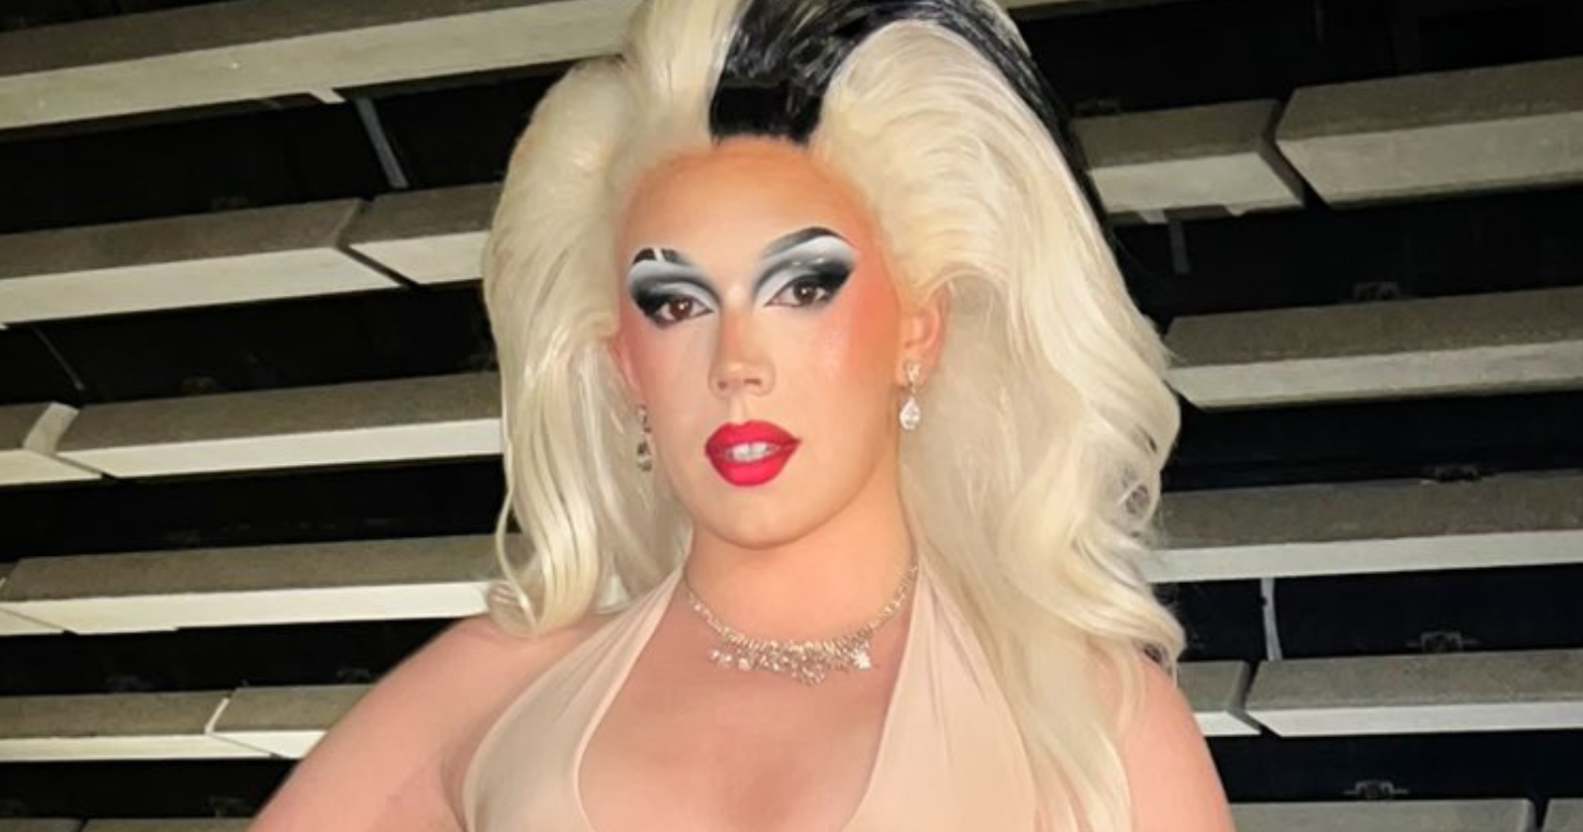 Miss Peaches dressed in a blonde wig and makeup for a Drag event.